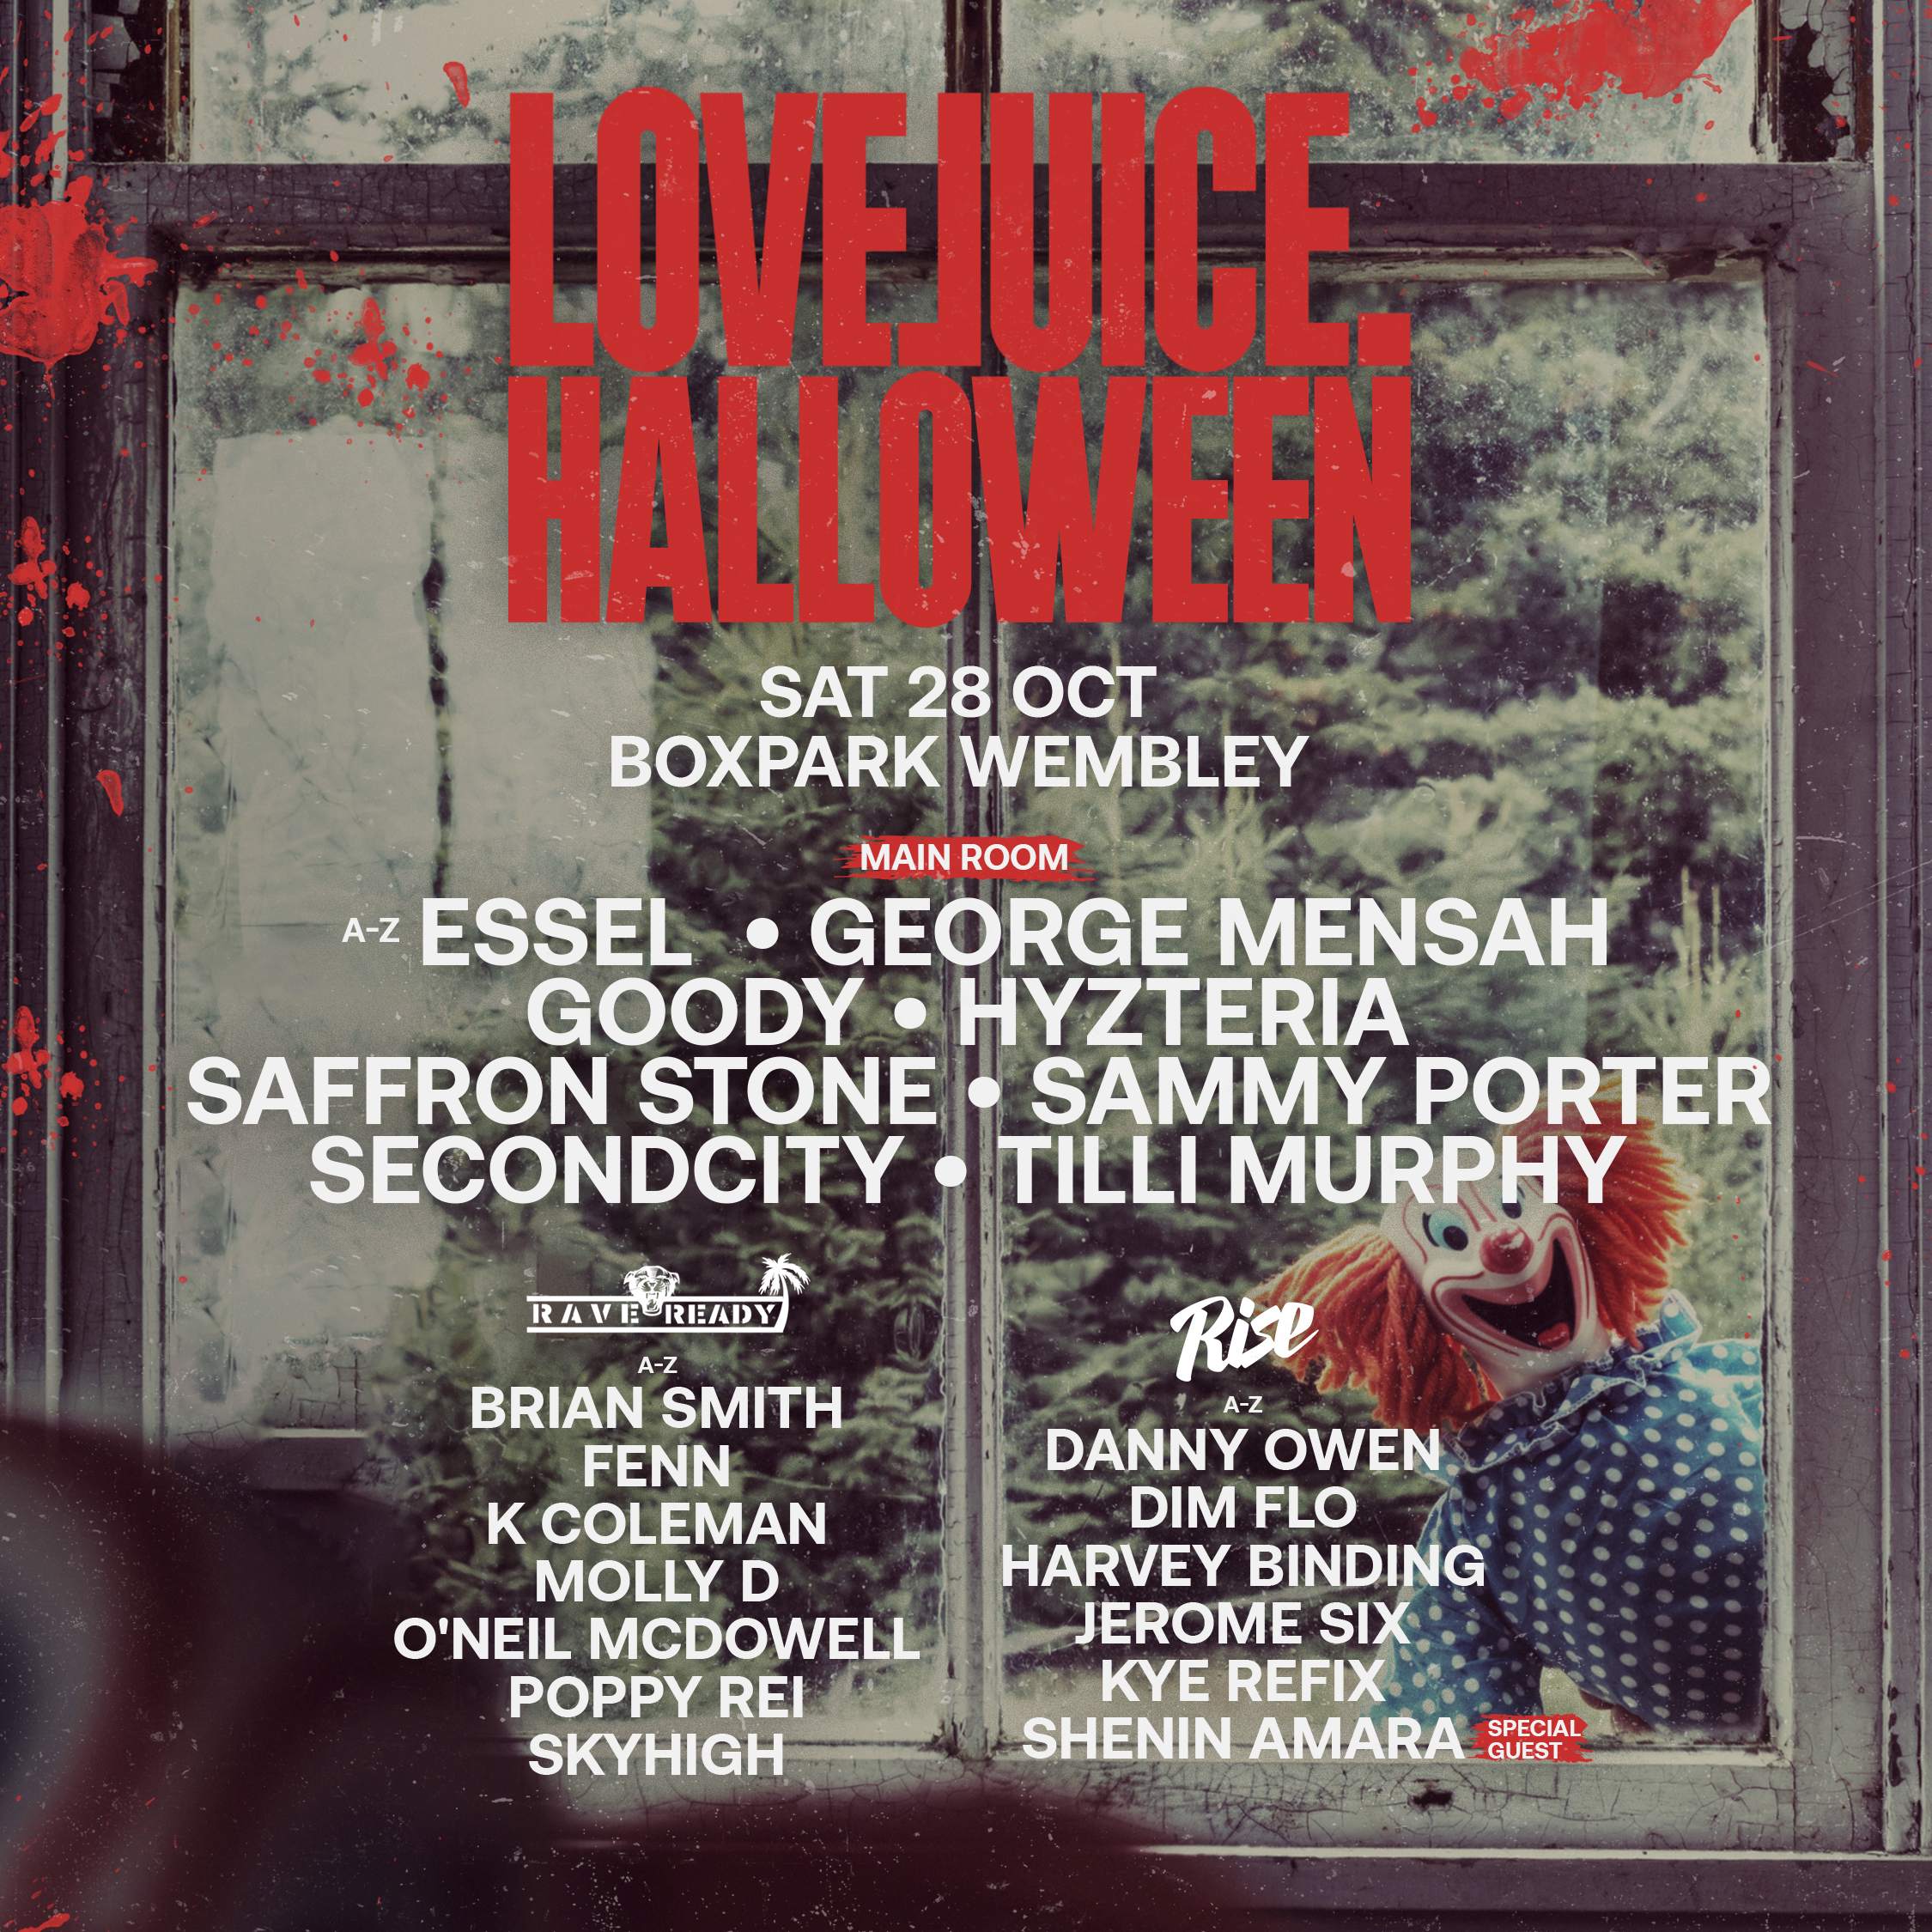 LoveJuice Halloween at Boxpark Wembley - フライヤー表